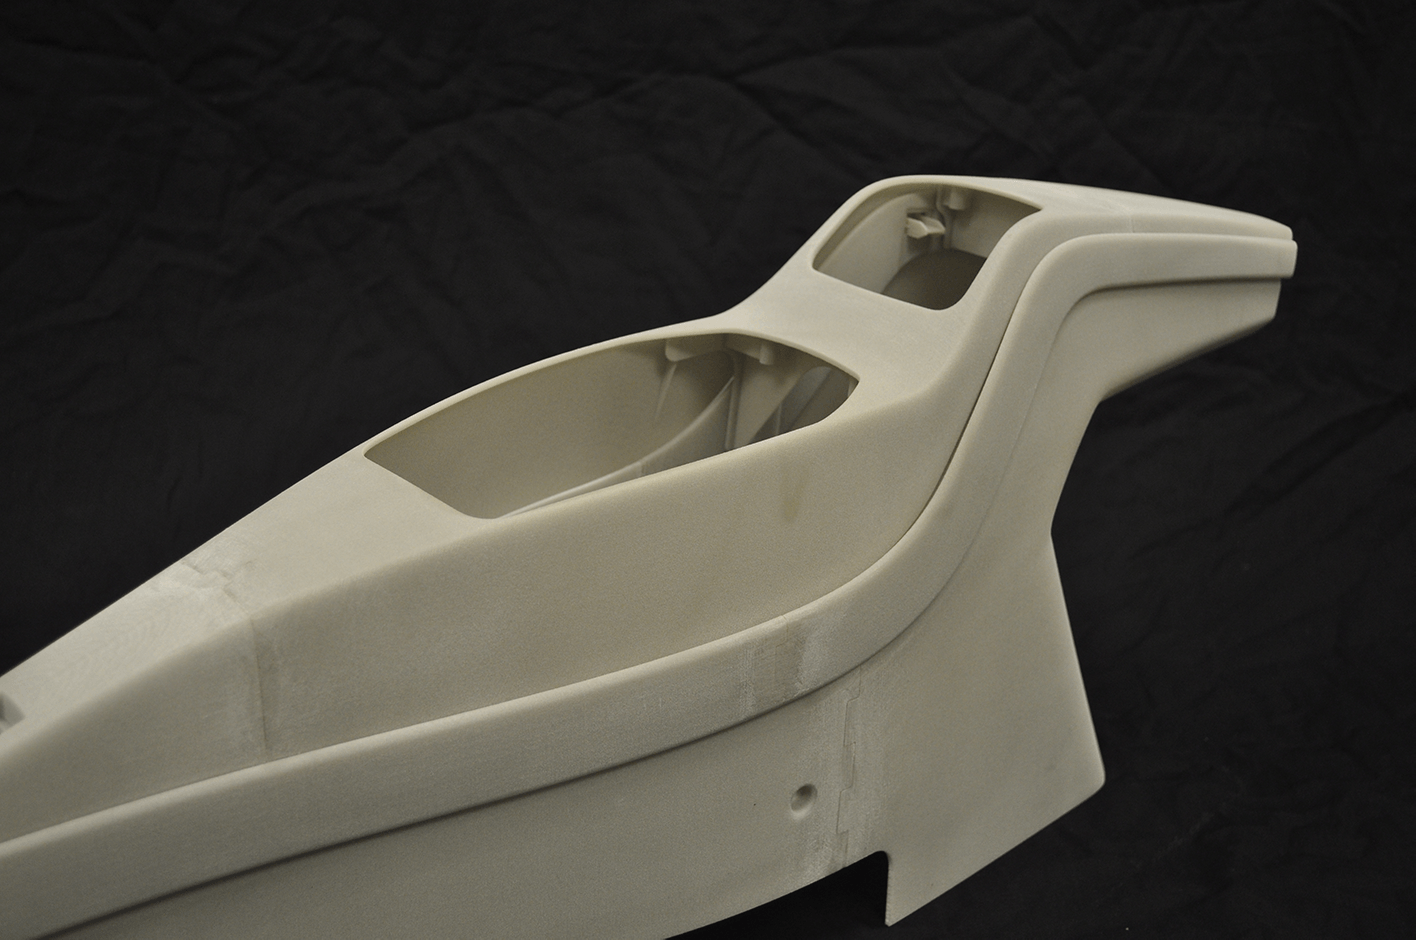 3D printed automotive console in SLS